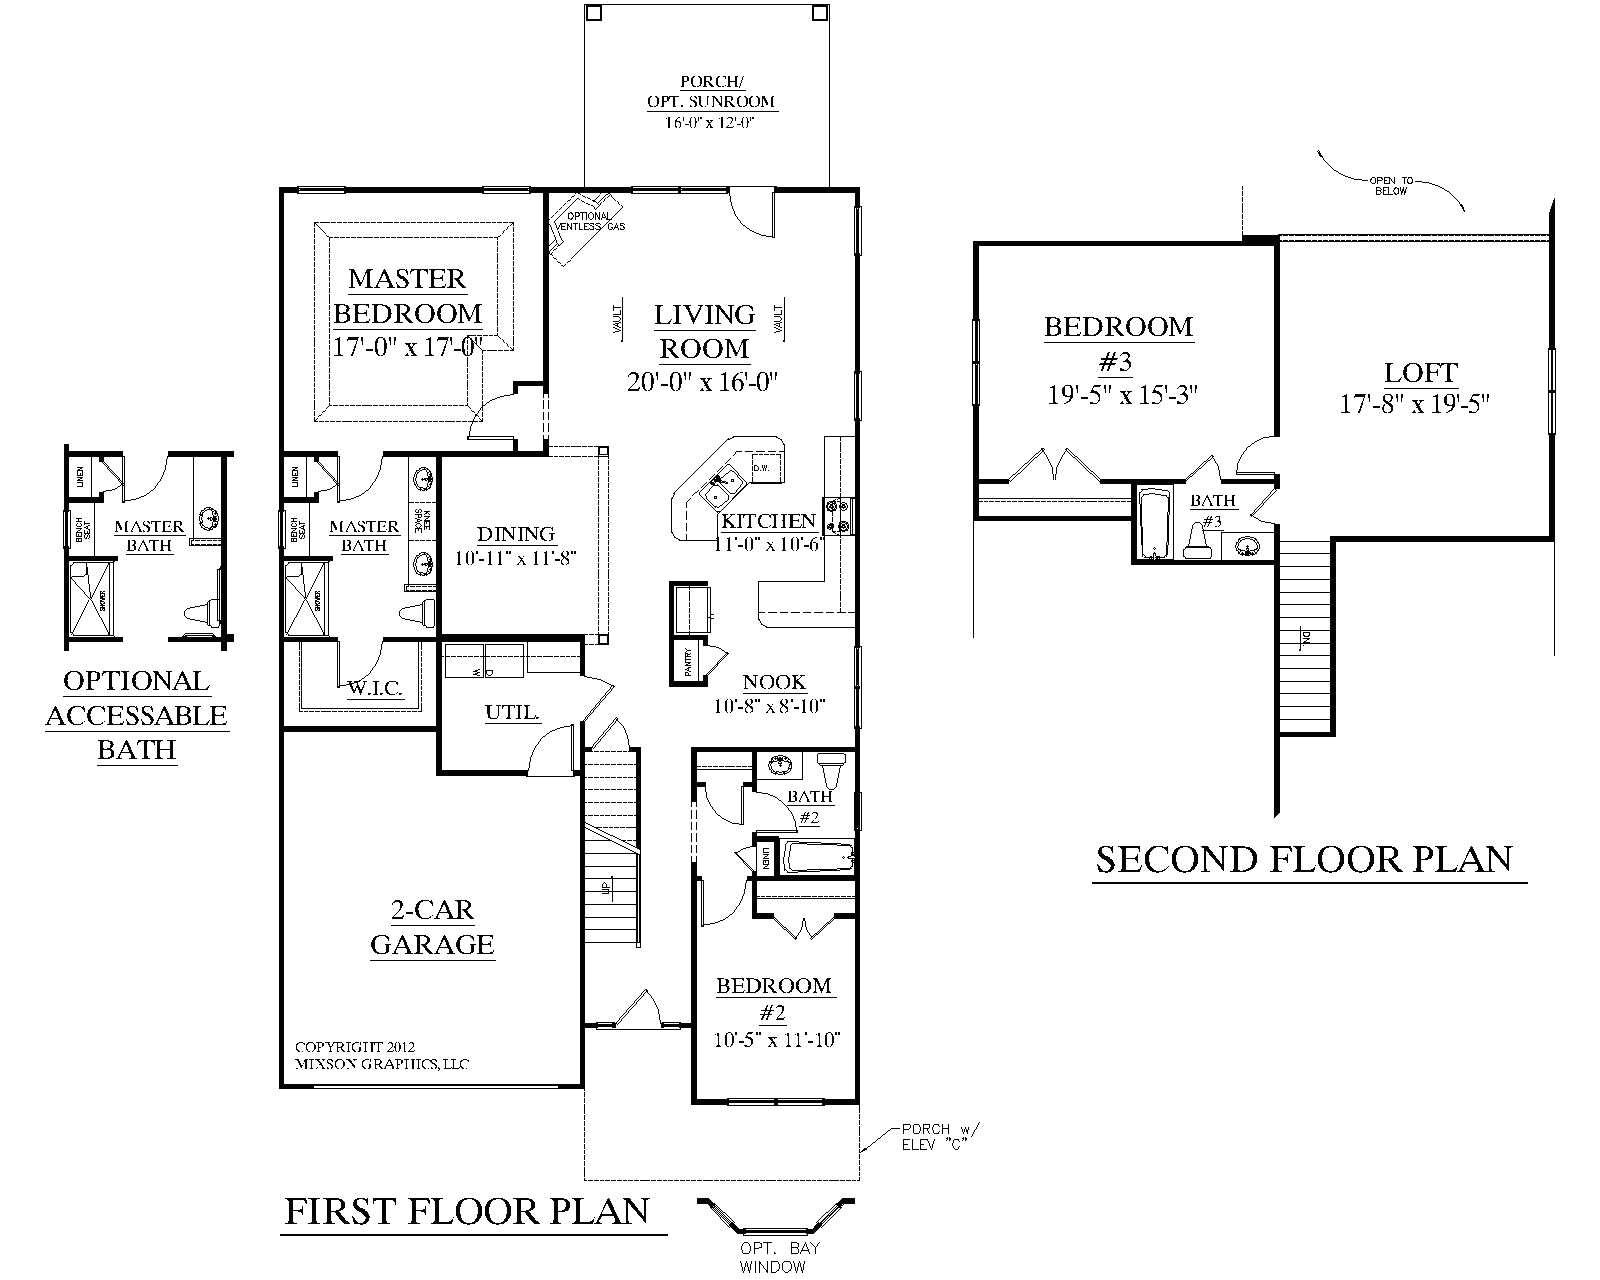 fabulous 5 bedroom house plans with 2 master suites collection also bathroom houseplants bath basement simple designs beautiful bedroomse plan floor volume open sqft vacation small home craftsman imag